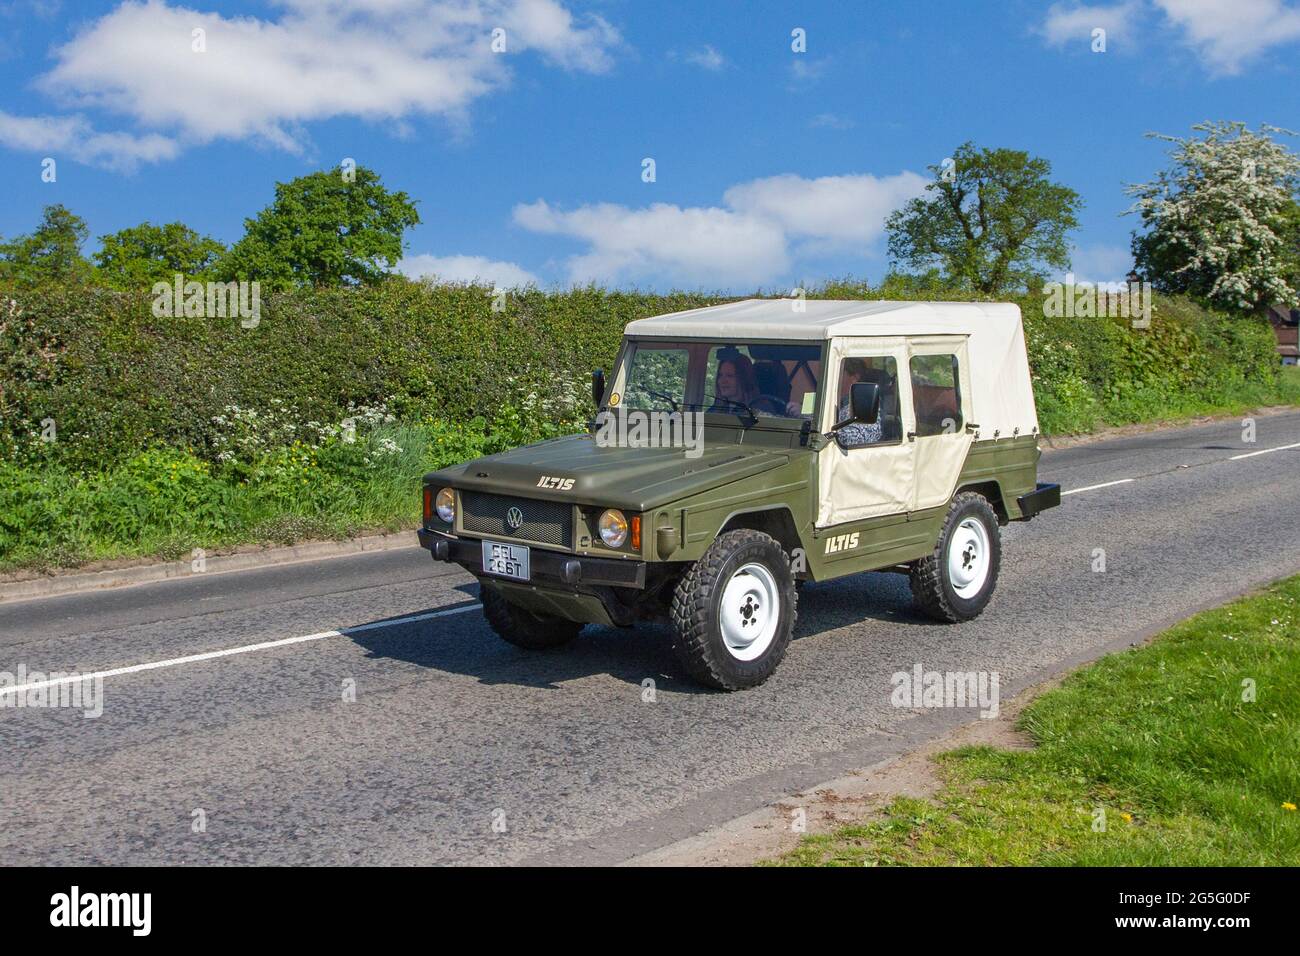 ILTIS 1979 70s 1970s VW Volkswagen 1714cc petrol canvas covered open top SUV, Type 183, Iltis, German polecat, military vehicle. en-route to Capesthorne Hall classic May car show, Cheshire, UK Stock Photo